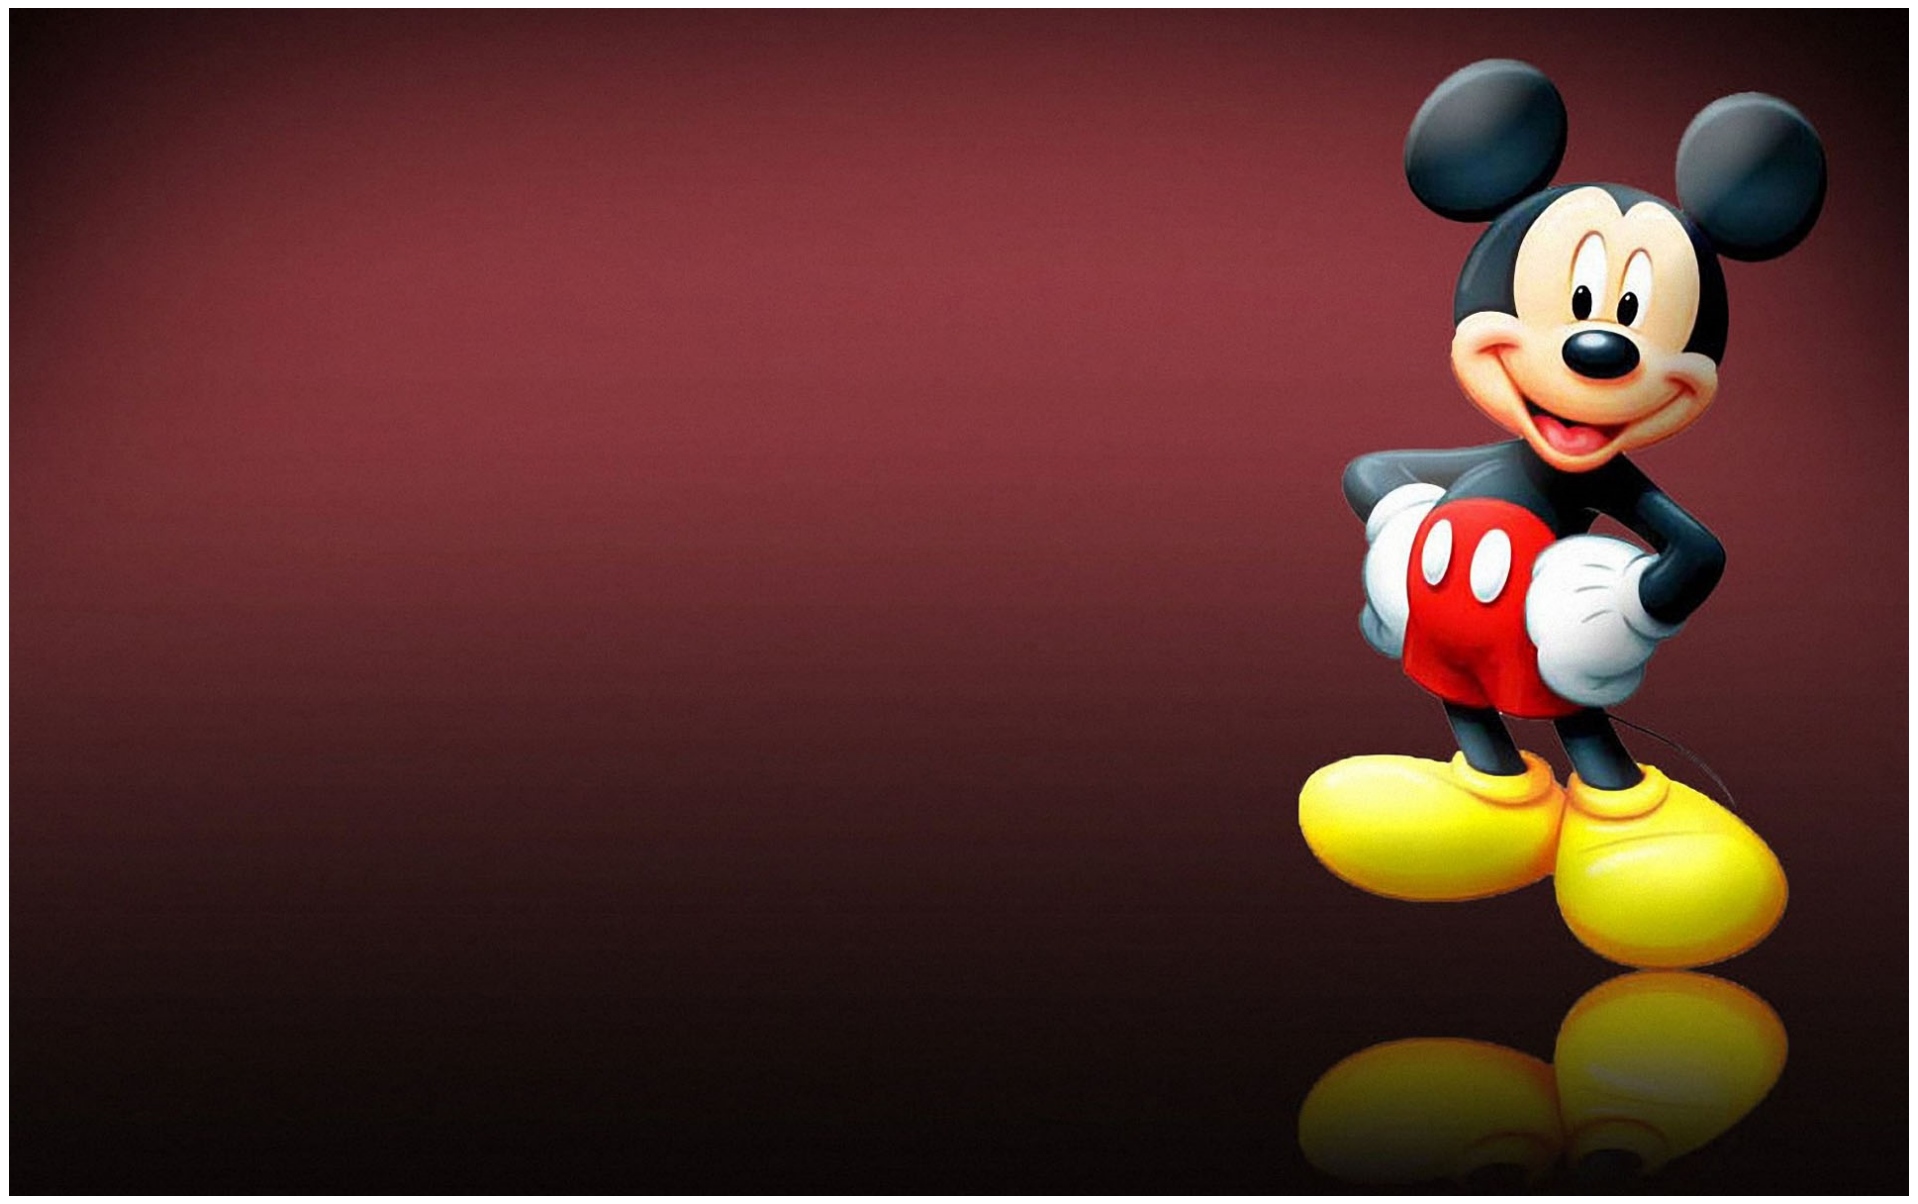 mickey mouse wallpaper free download,cartoon,animated cartoon,animation,fictional character,figurine